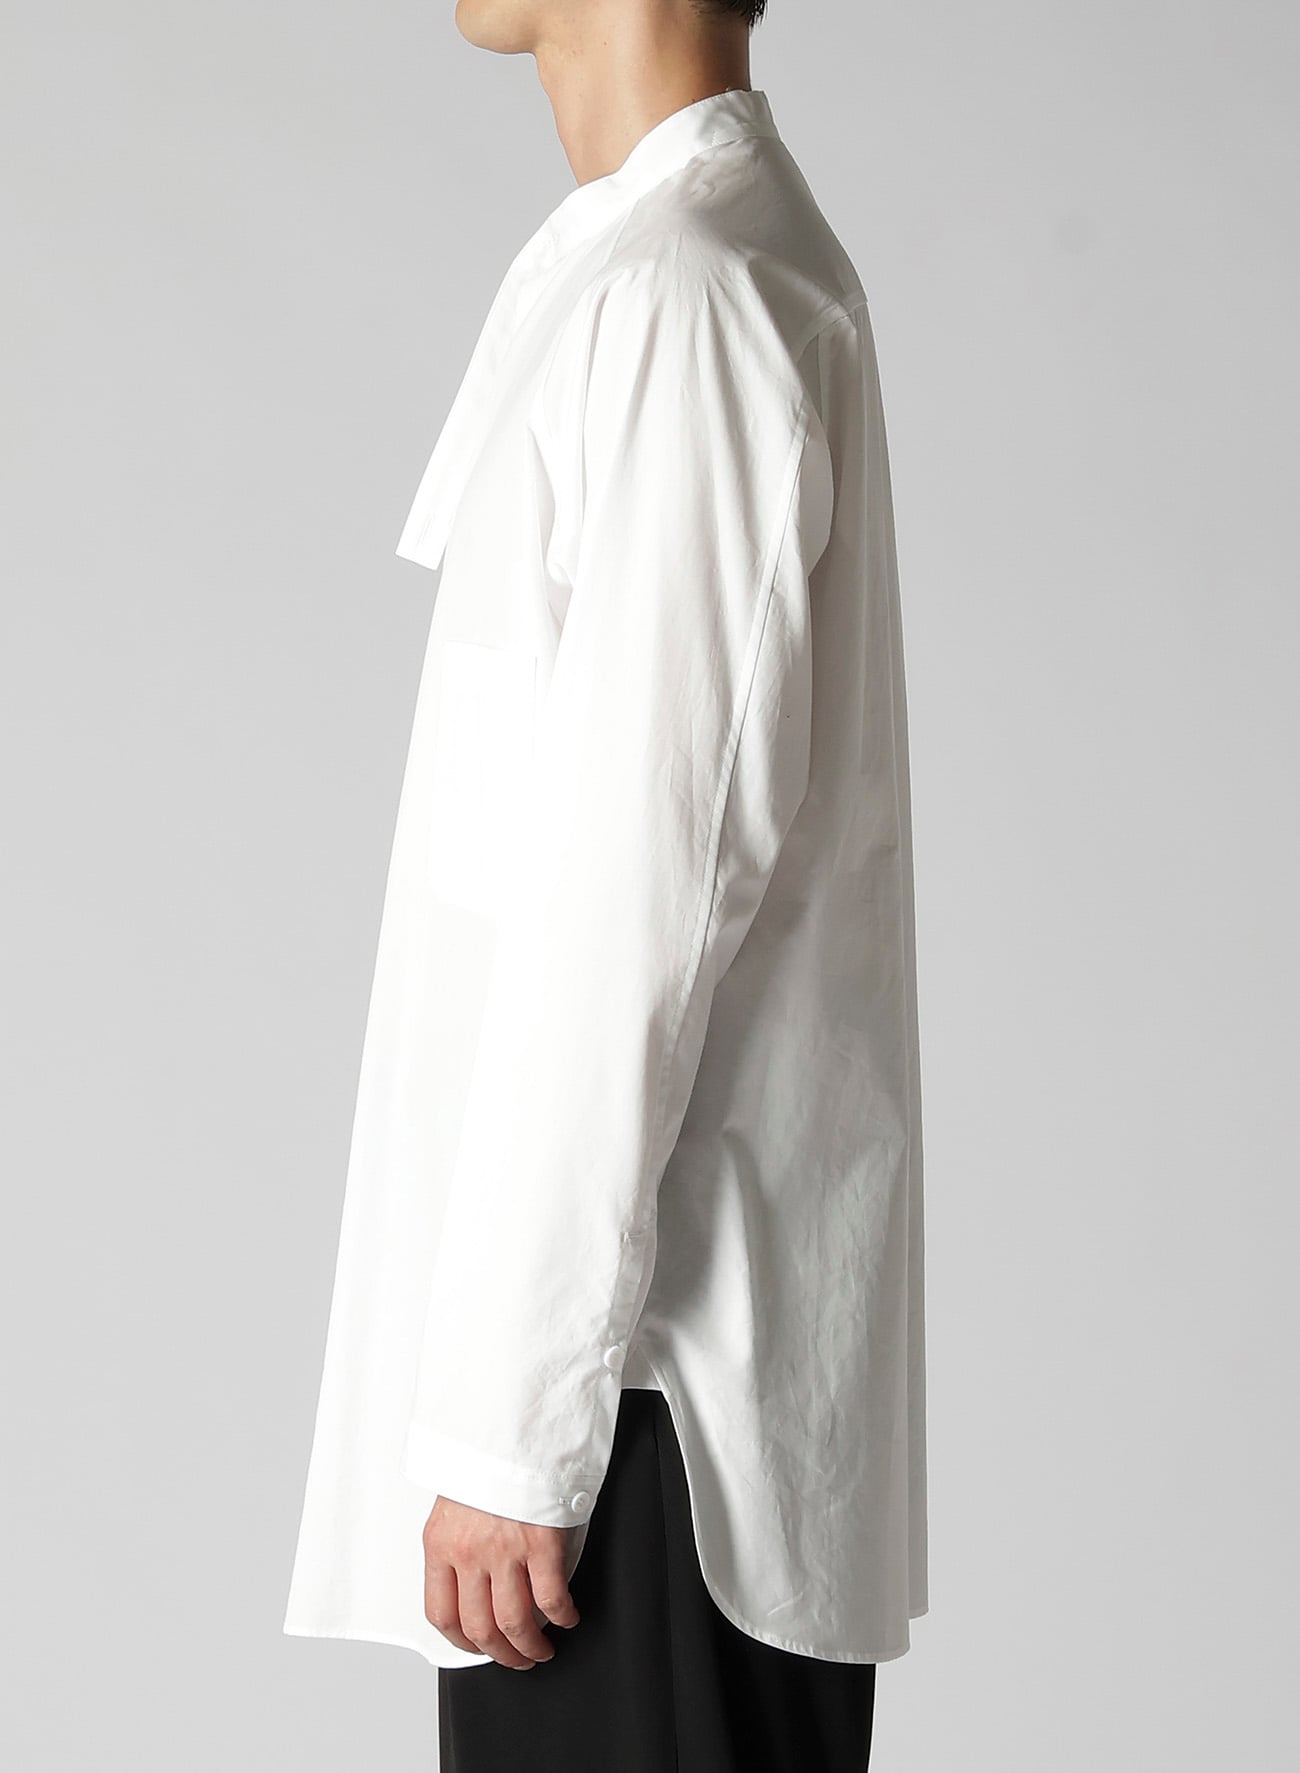 100/2 BROAD J-UNEVEN STAND B-A(S White): Yohji Yamamoto POUR HOMME 